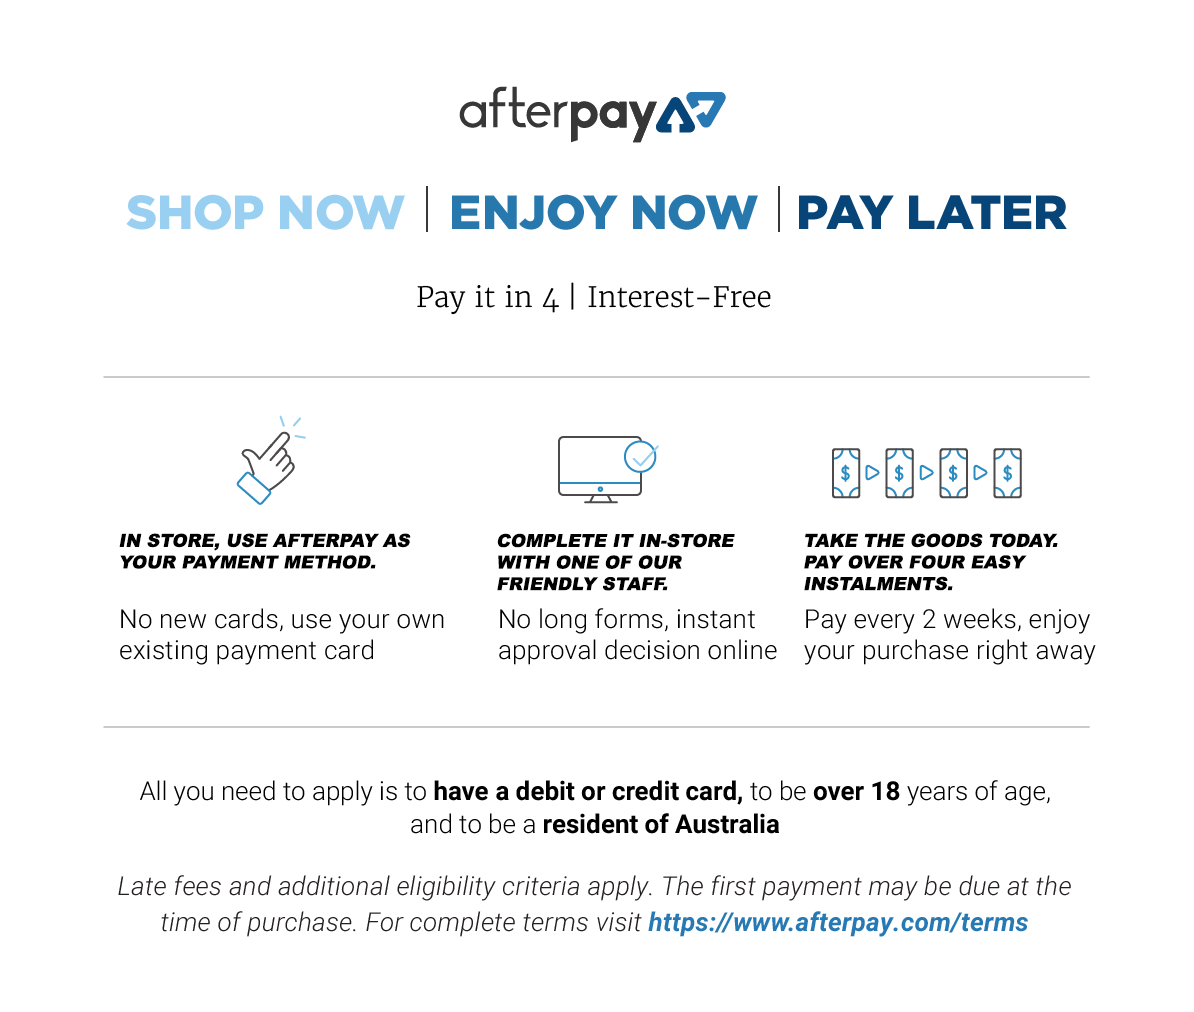 How Does Afterpay Work In Stores?, Wondering how Afterpay works in stores?  We've got you. ⠀⠀⠀⠀⠀⠀⠀ ✓ Everything you love about Afterpay—now available  in select stores. ✓ To use in stores